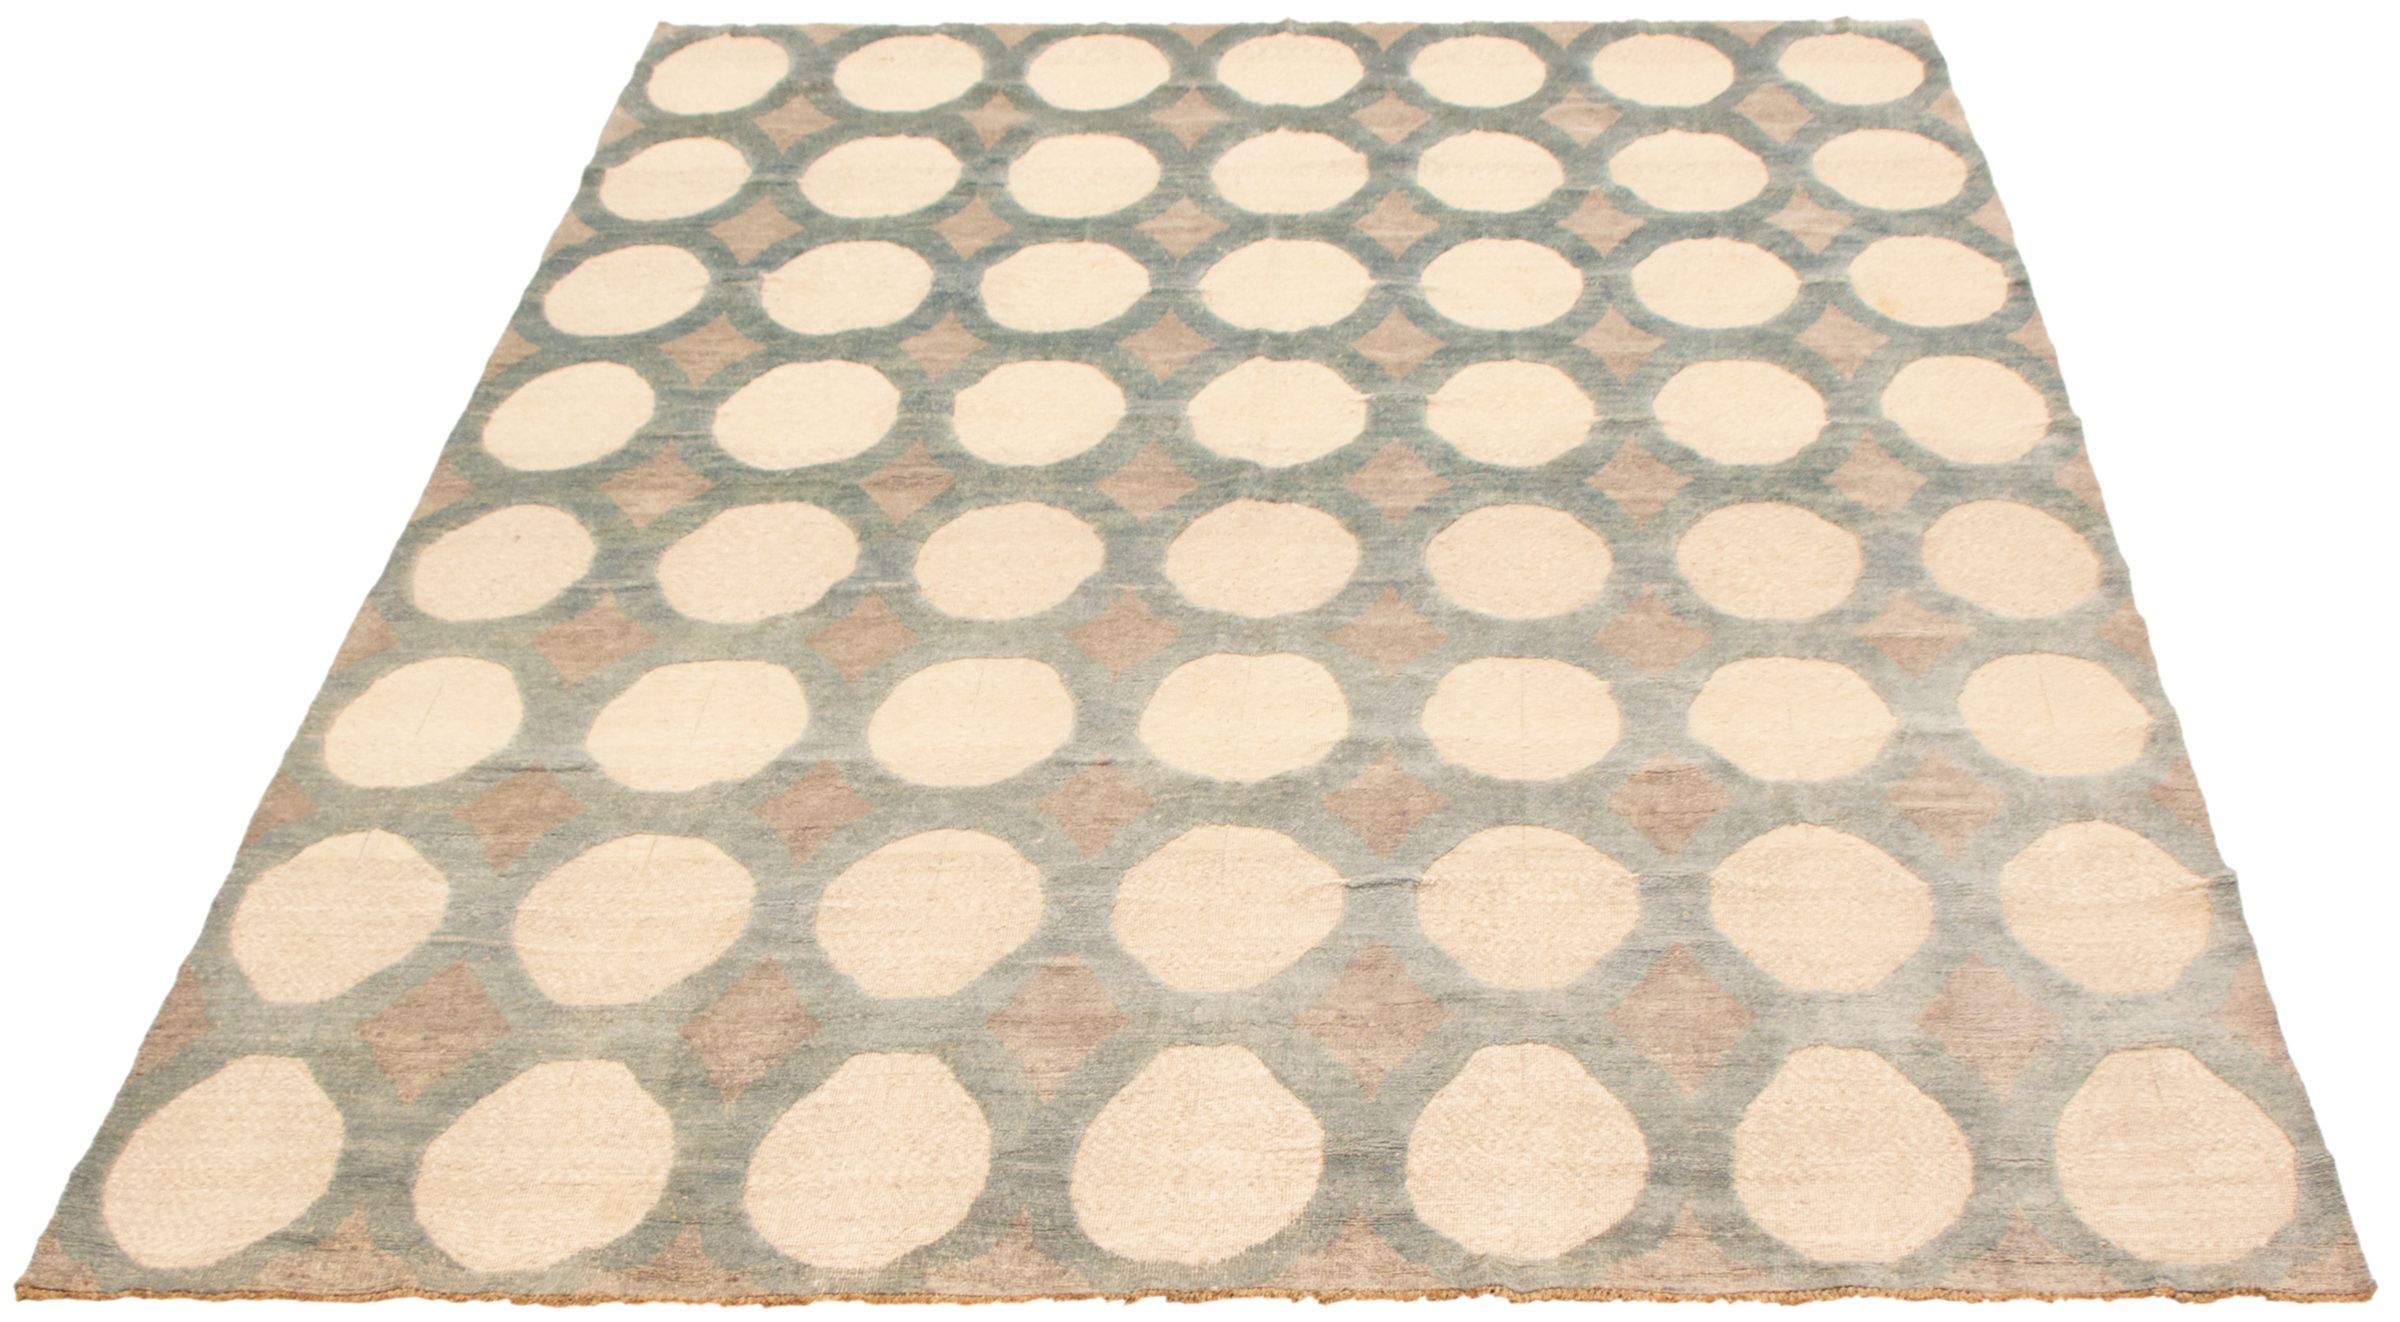 Bedroom Hand-Knotted Wool Rug Finest Peshawar Ziegler Casual Brown Rug 8'0 x 10'0 eCarpet Gallery Large Area Rug for Living Room 362359 